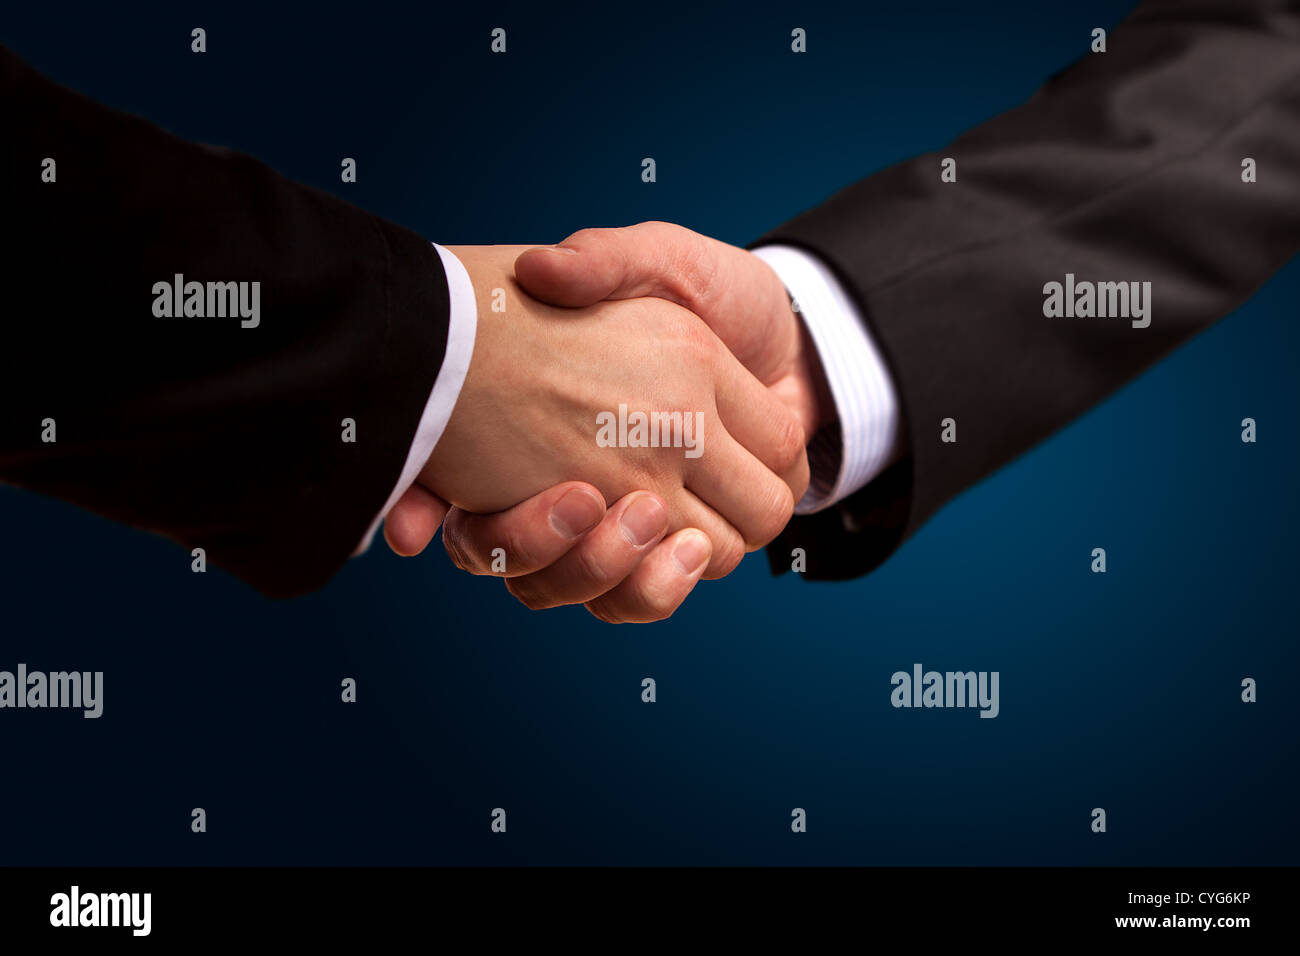 Closeup of a business hand shake between two colleagues Stock Photo